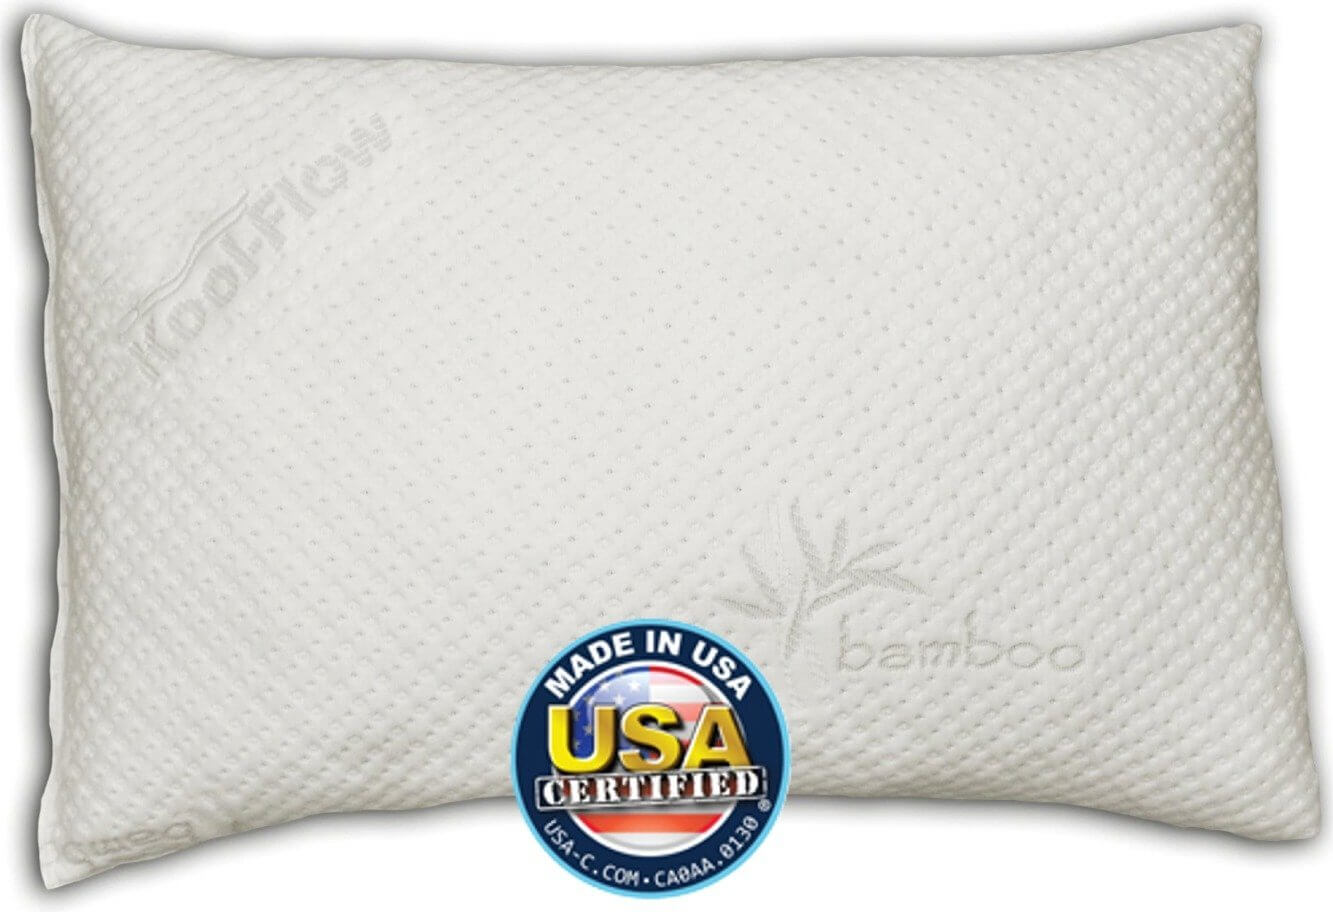 Queen Snuggle-Pedic Shredded Memory Foam Pillow w/ Bamboo Ultra-Luxury Cover 